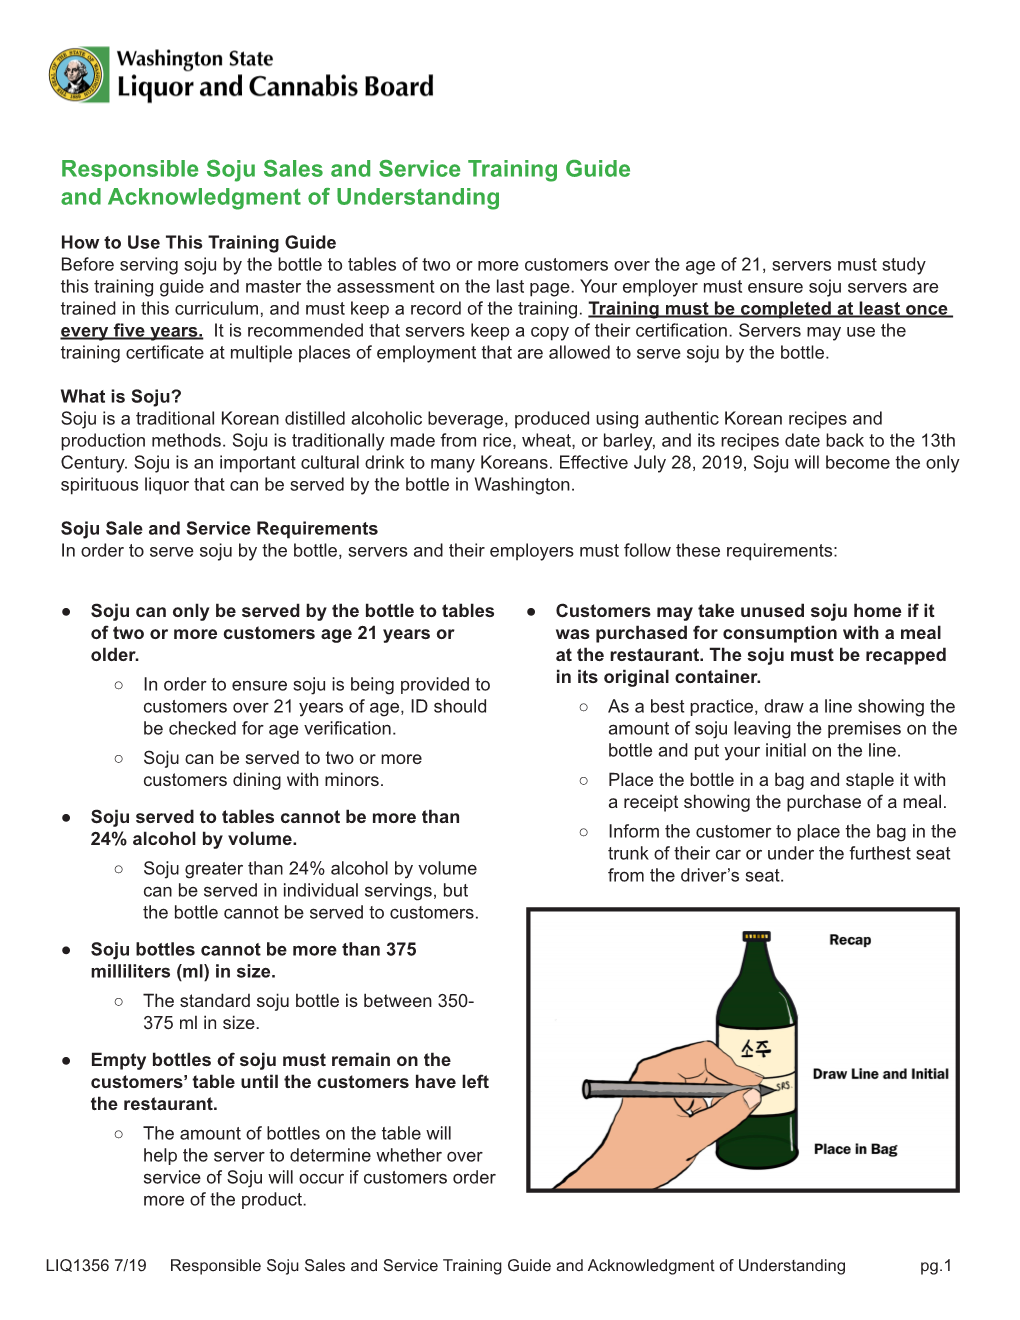 Responsible Soju Sales and Service Training Guide and Acknowledgment of Understanding